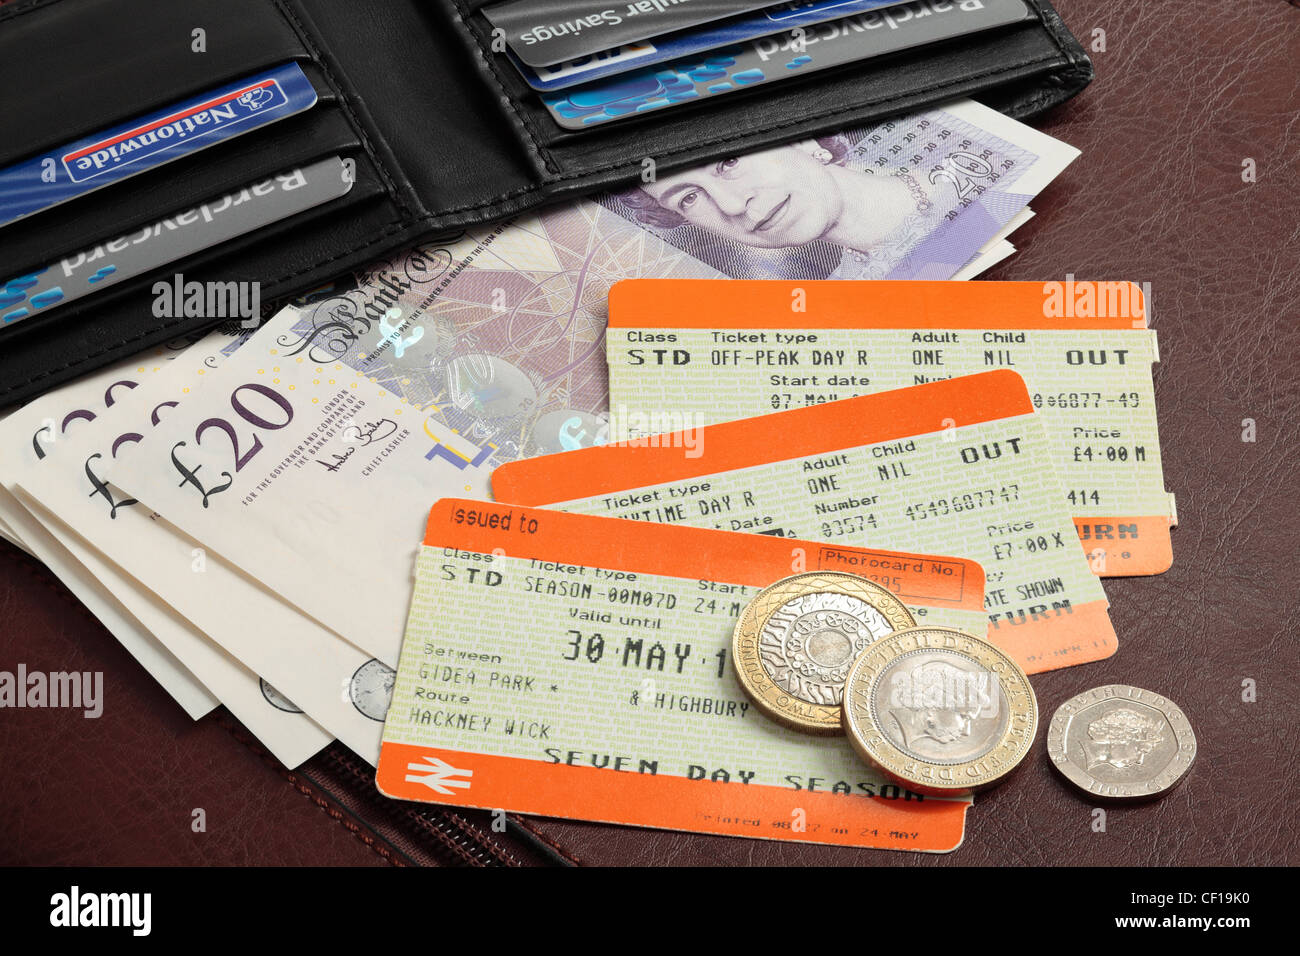 Train tickets - spiralling cost of rail fares. Stock Photo